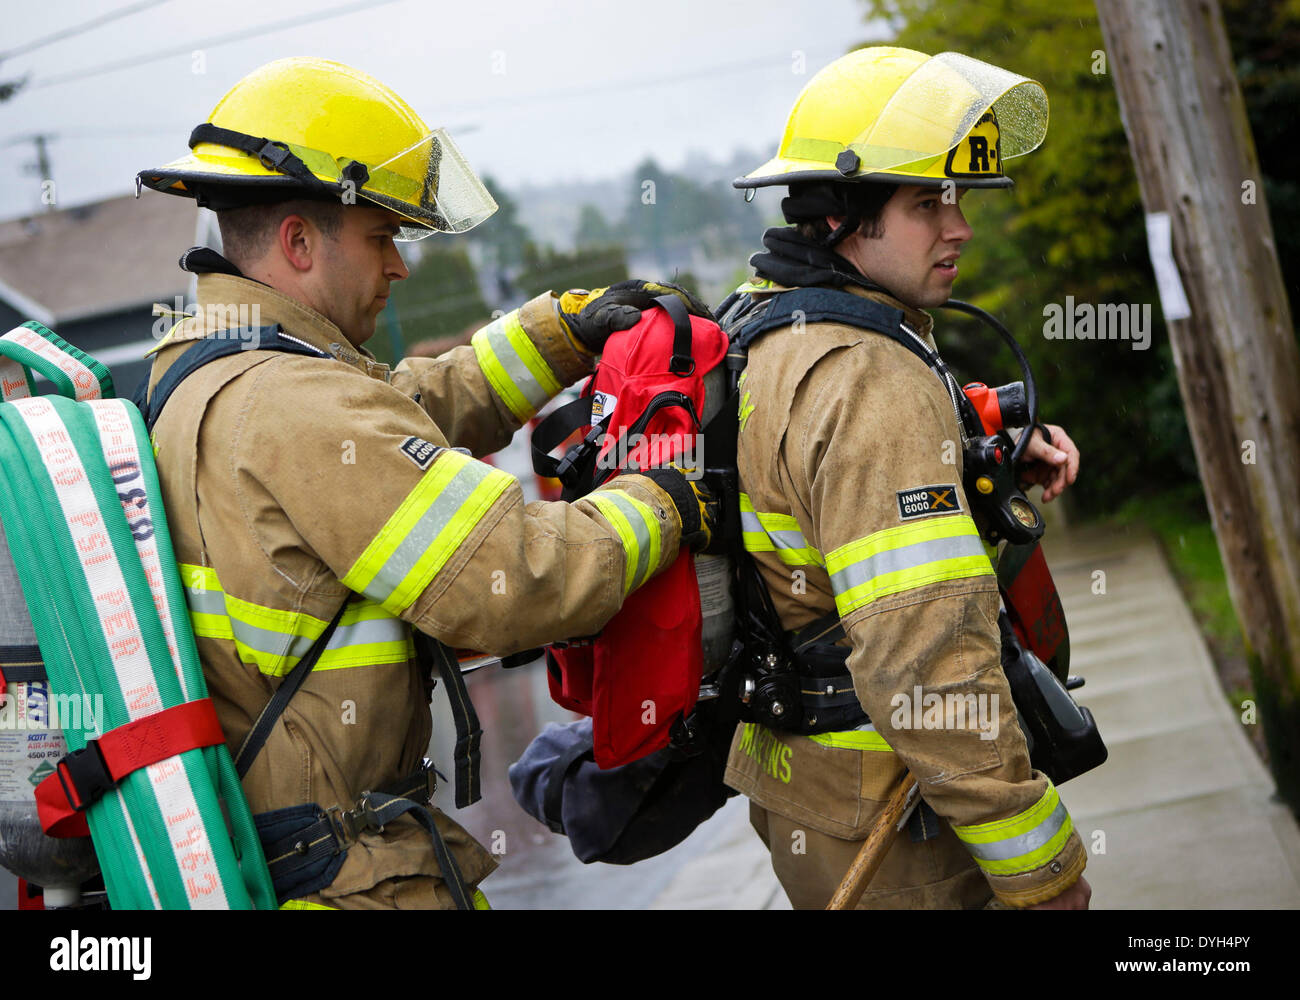 Vancouver, Canada. 17th Apr, 2014. Firefighters check with each other their equipments before entering a building during the fire and rescue exercise in city of Coquitlam, Canada, on April 17, 2014. Firefighters from city of Coquitlam's Fire department participated in an exercise at a vacant building to practice their techniques and responses in dealing with fires in high buildings. Credit:  Liang Sen/Xinhua/Alamy Live News Stock Photo